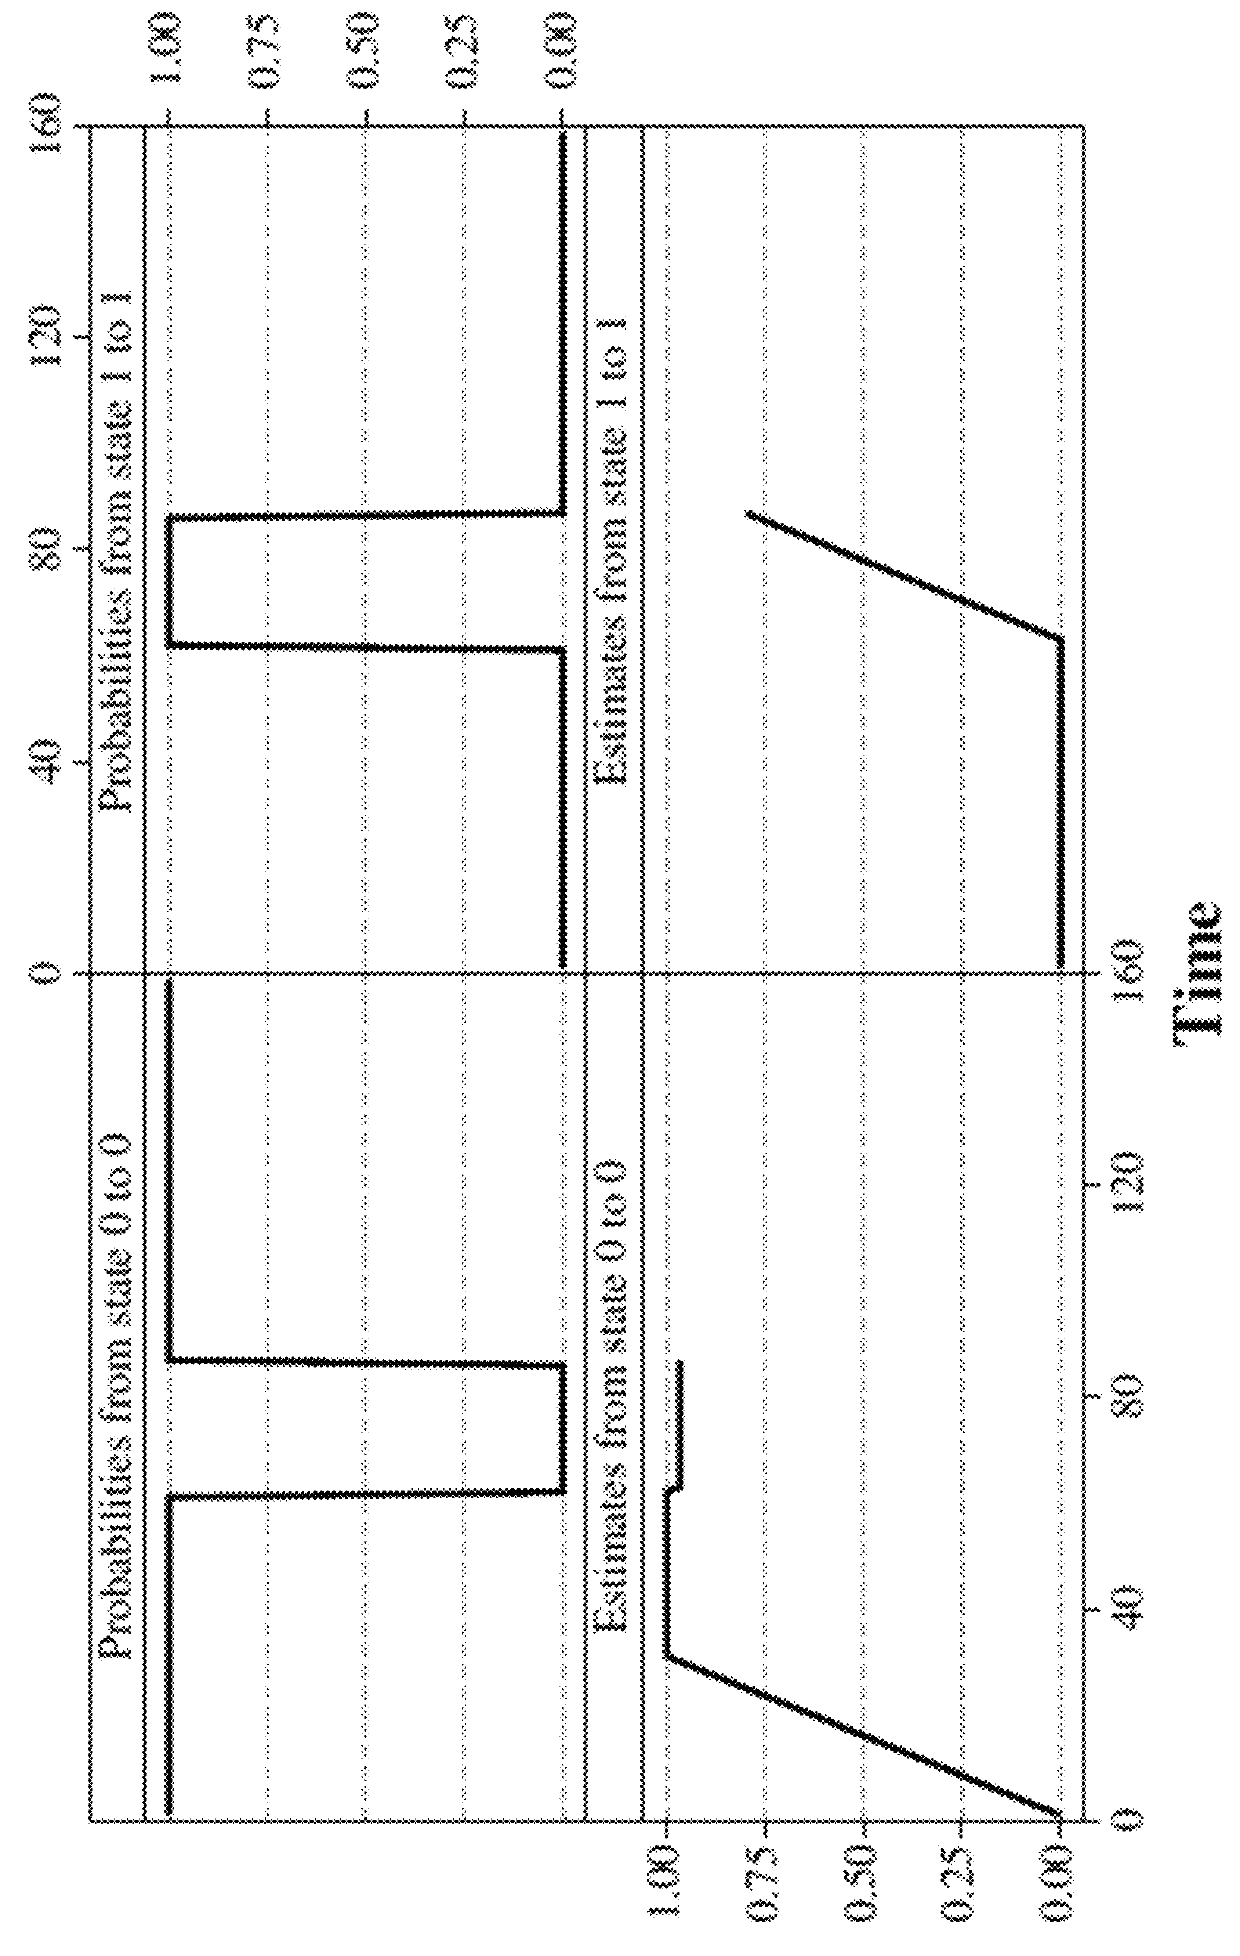 System, method and computer program product for energy-efficient and service level agreement (SLA)-based management of data centers for cloud computing